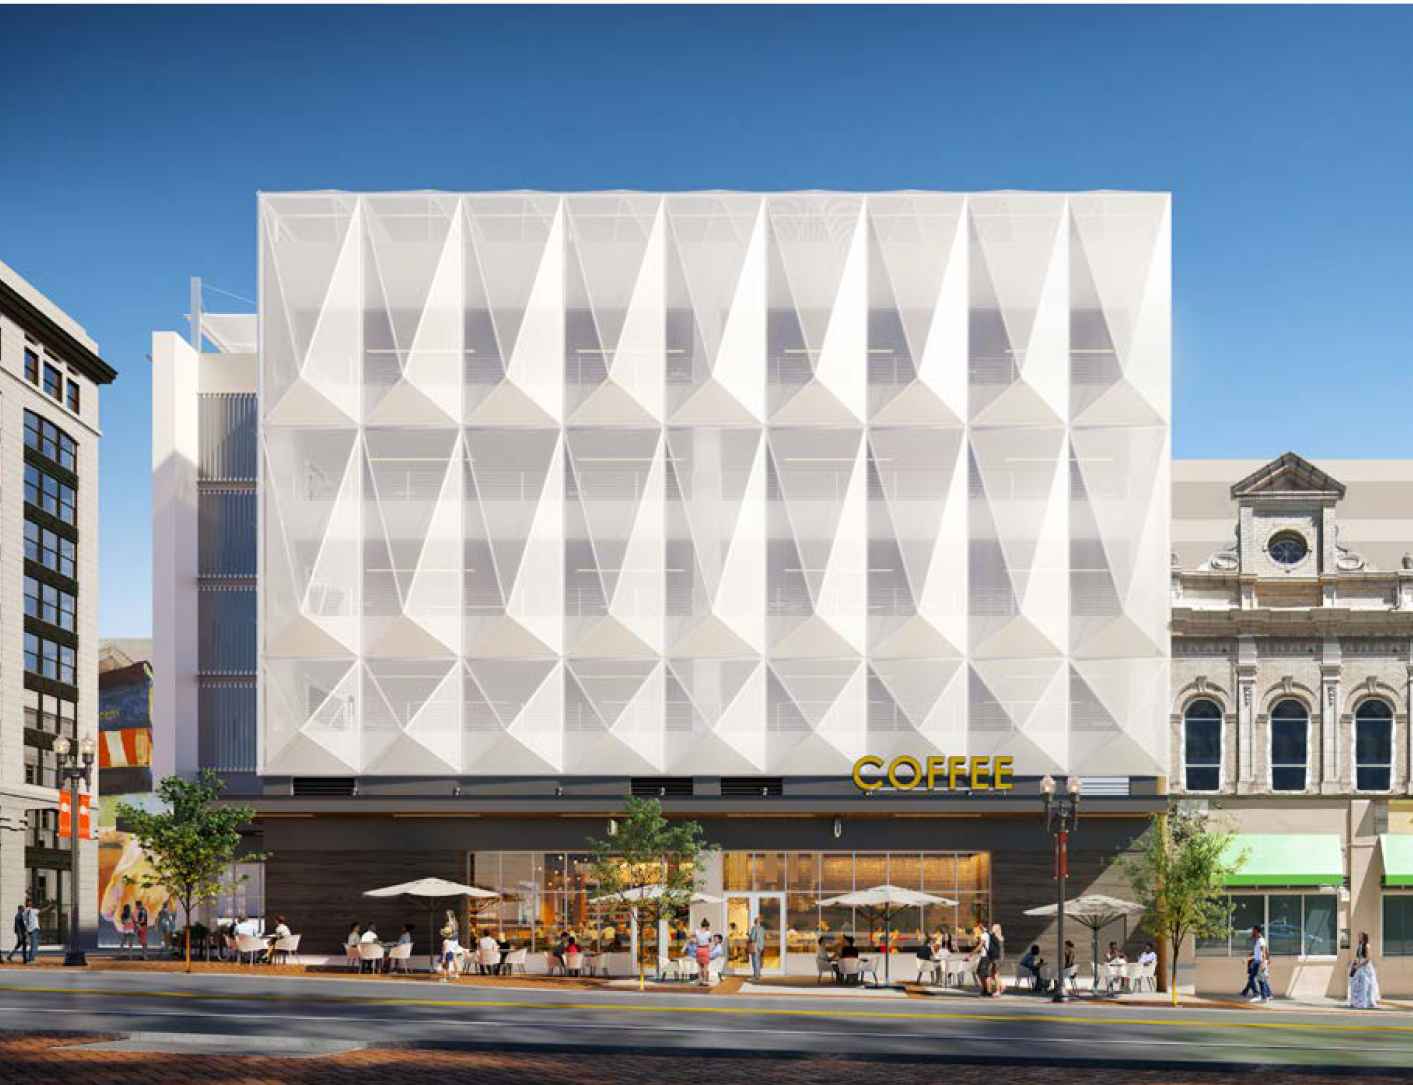 A fabric facade is planned on the VyStar parking garage along Laura Street.